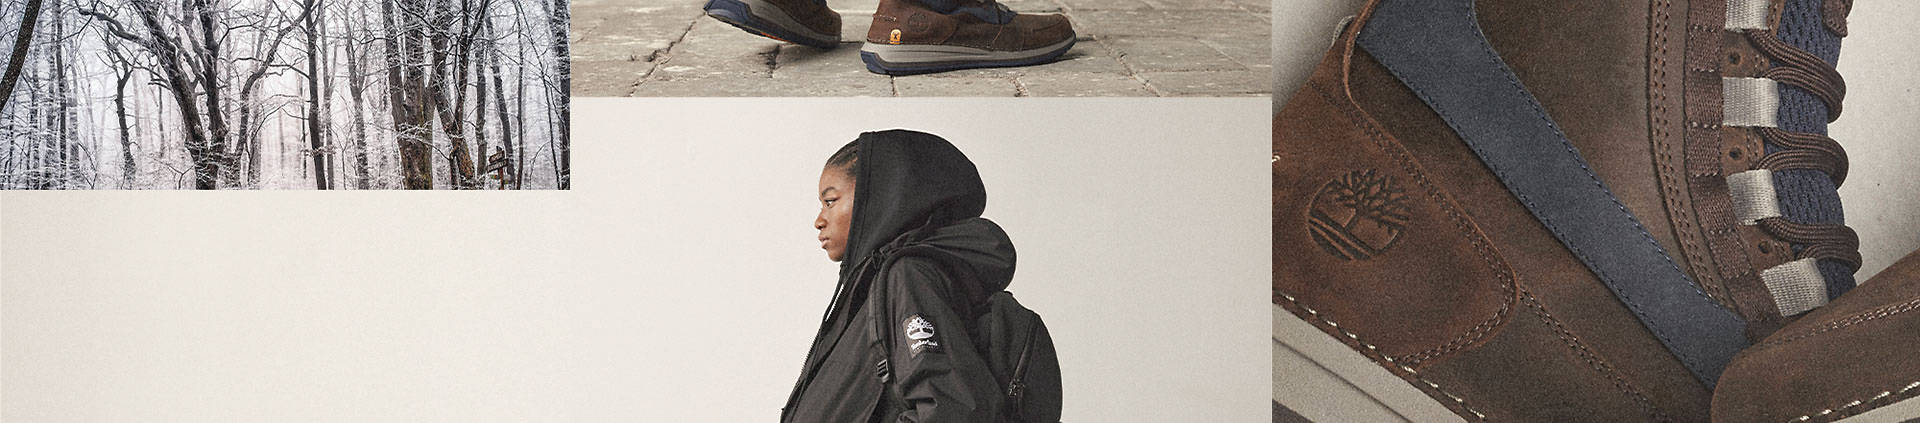 Collage of four images - upper-left is an image of trees covered by snow in the winter. Image two is a close up of brown Timberland boots on a city sidewalk. Image three is a close up of the right side of a brown Timberland boot with navy accents. Image four is an image of the left side of a woman with braids in a black Timberland windbreaker with a black Timberland backpack as she looks straight ahead.